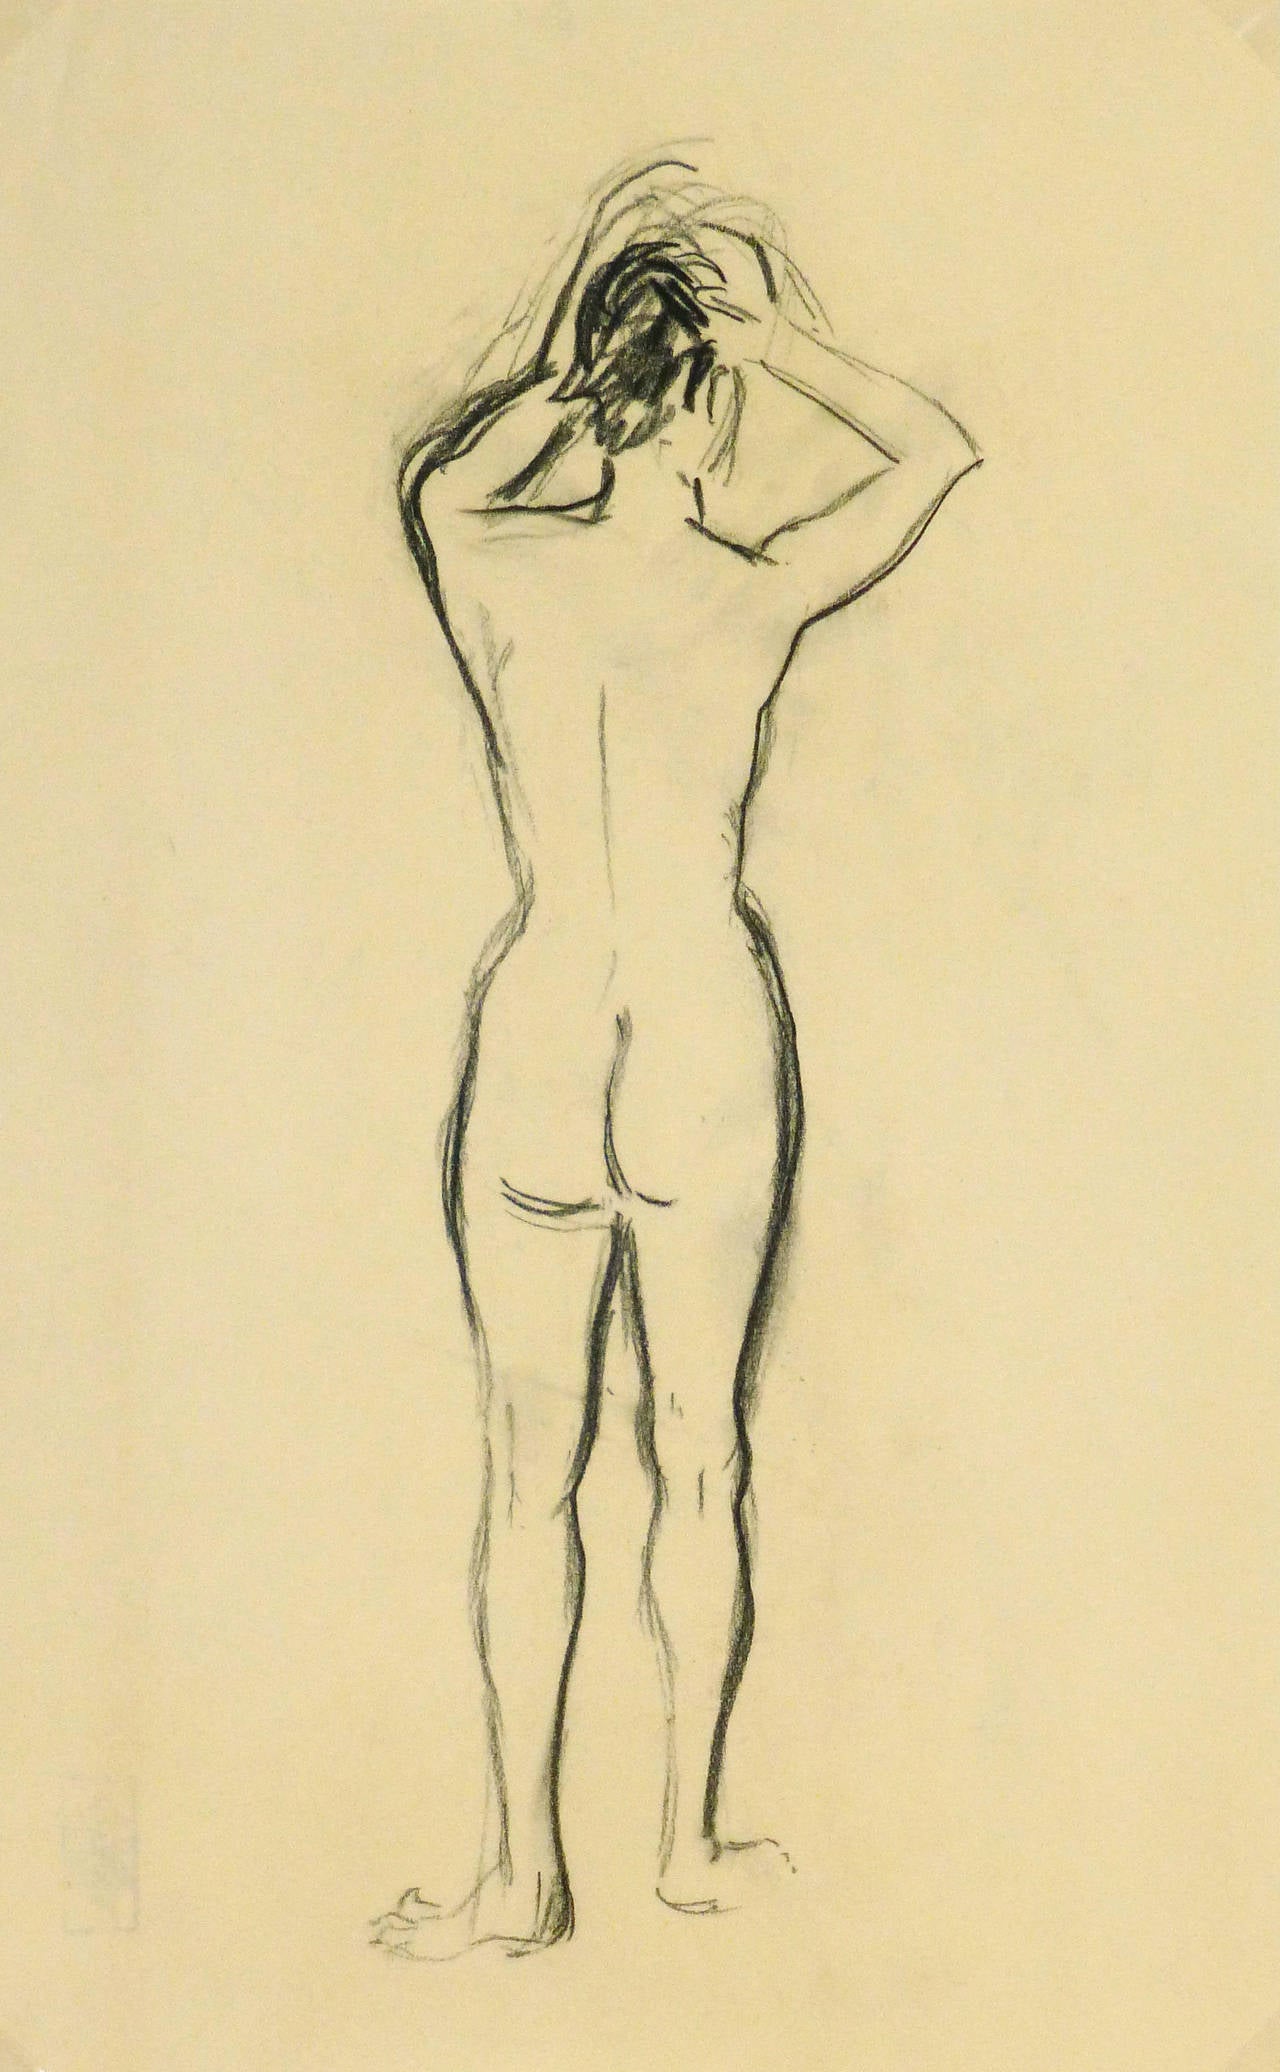 French Charcoal Sketch - Nude Female Standing - Art by Maurice Porte